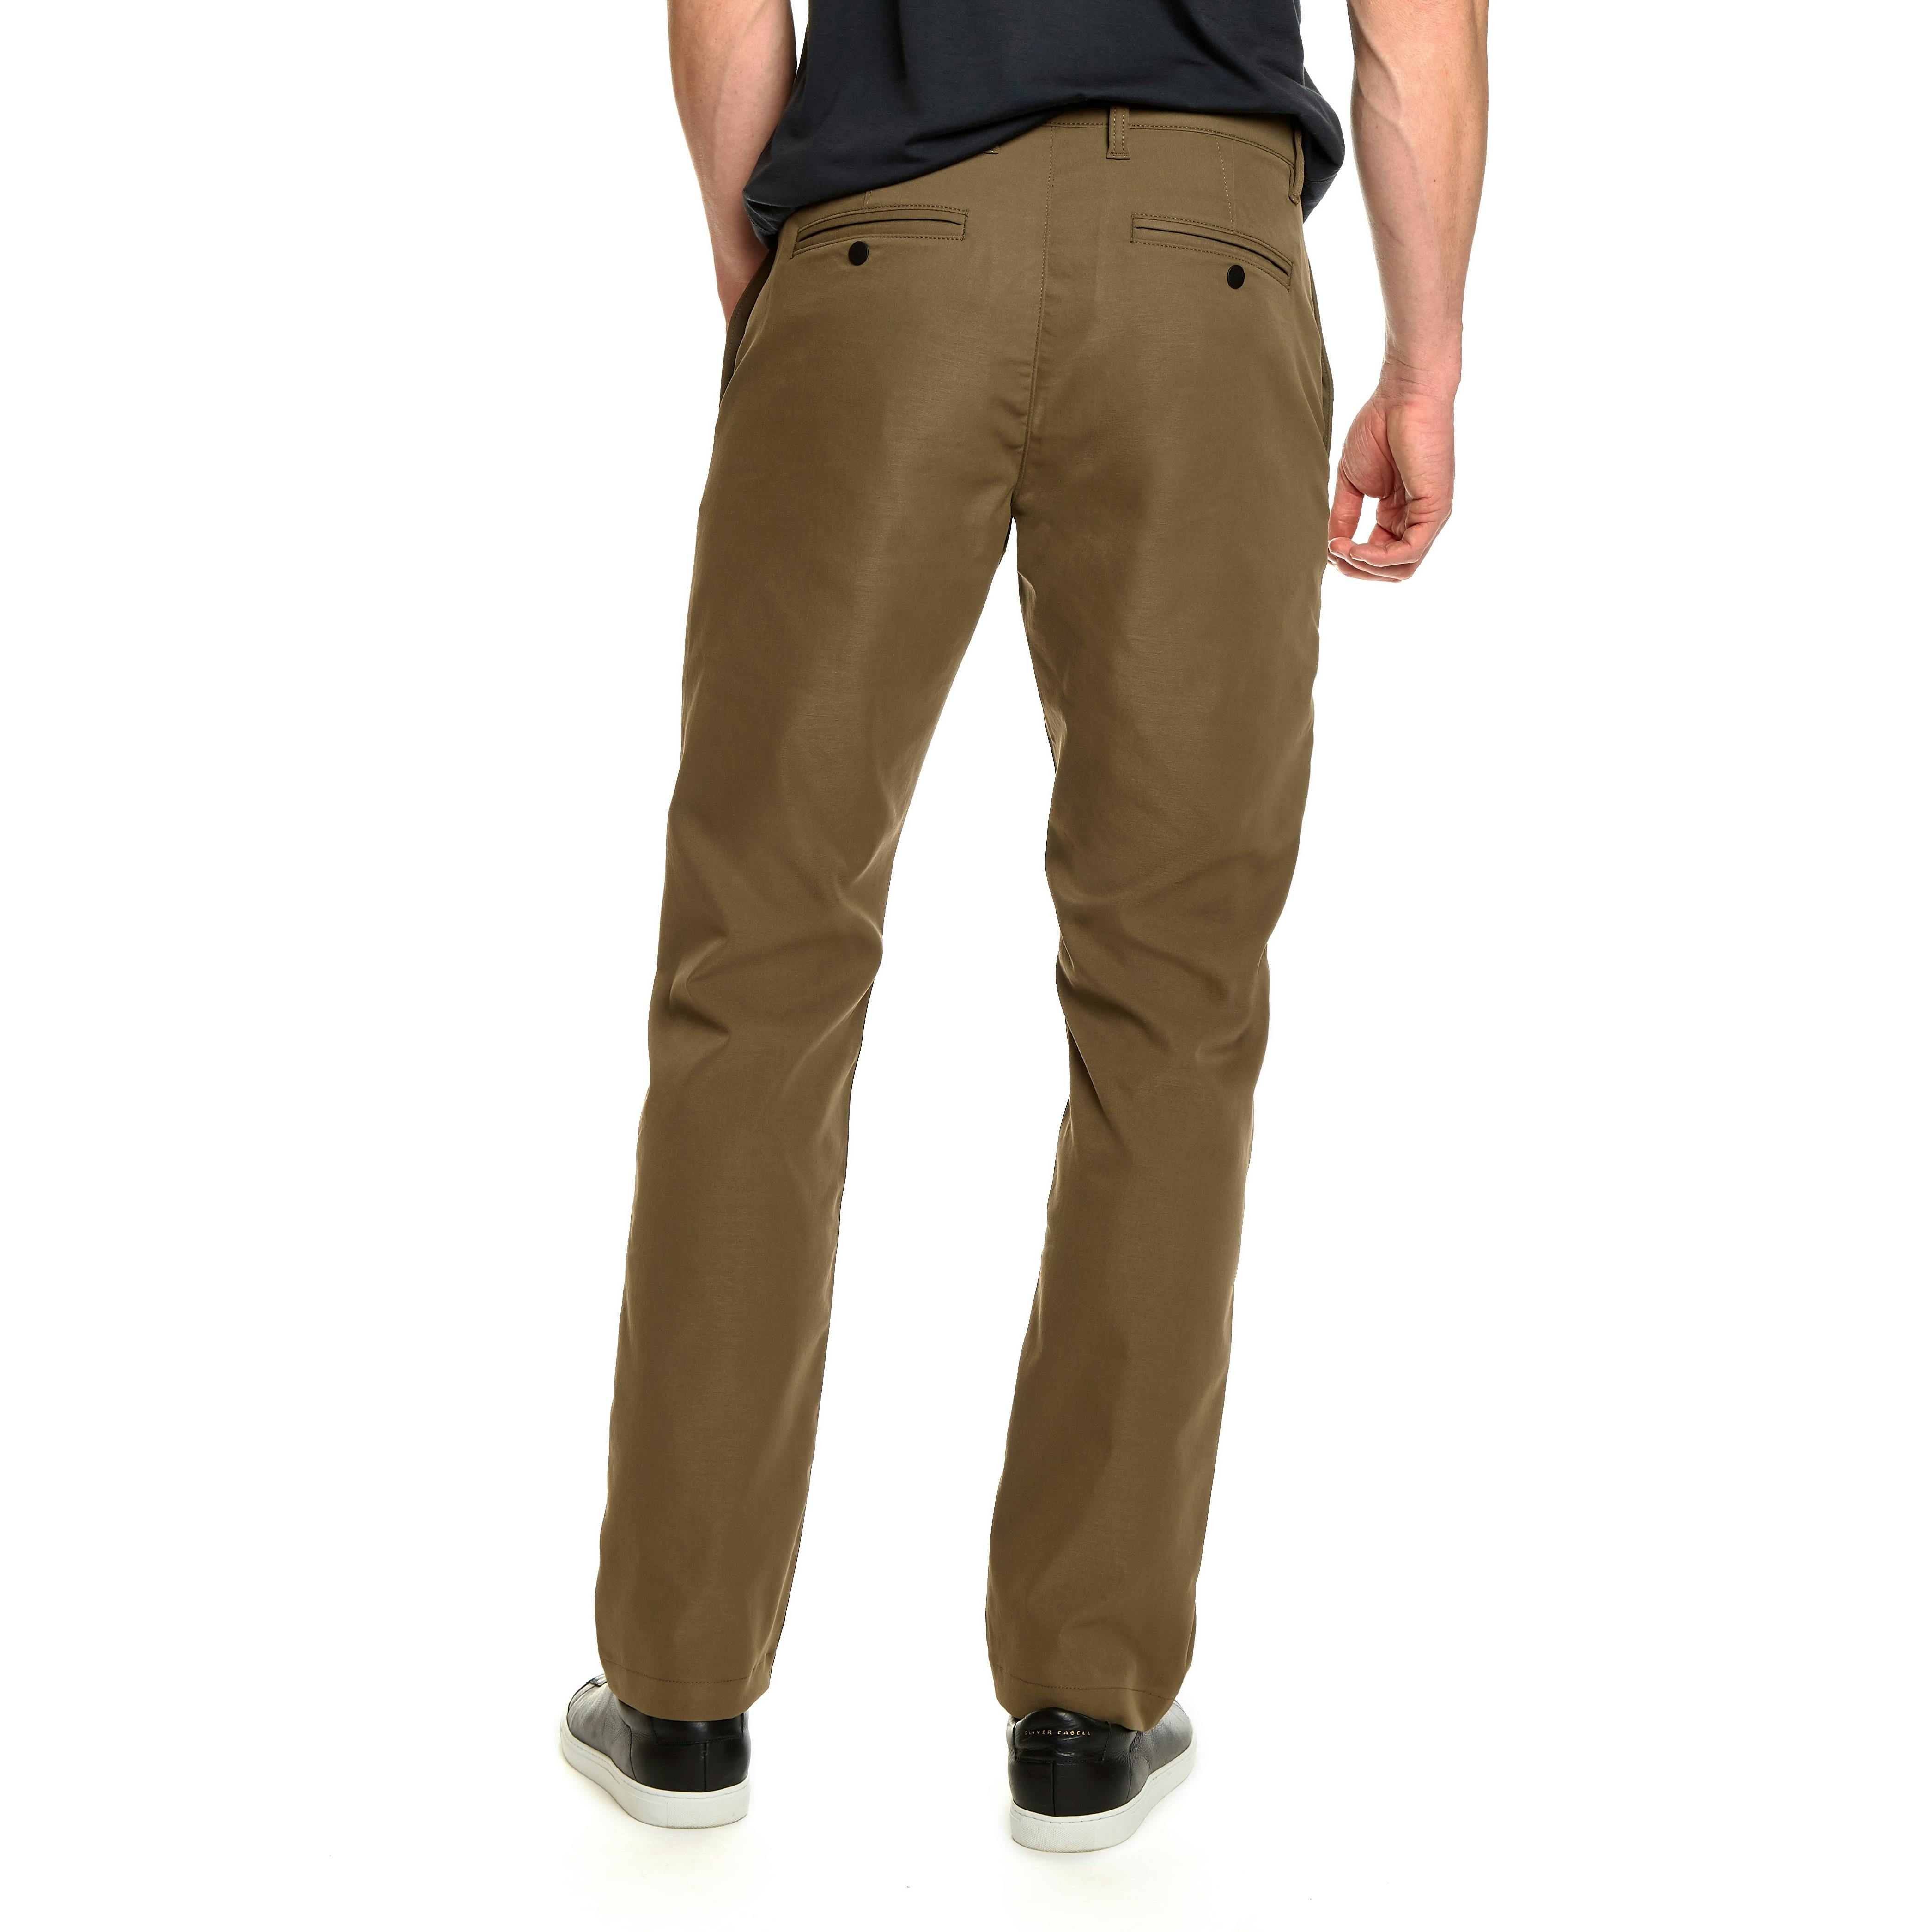 Proof Nomad Pant - Straight